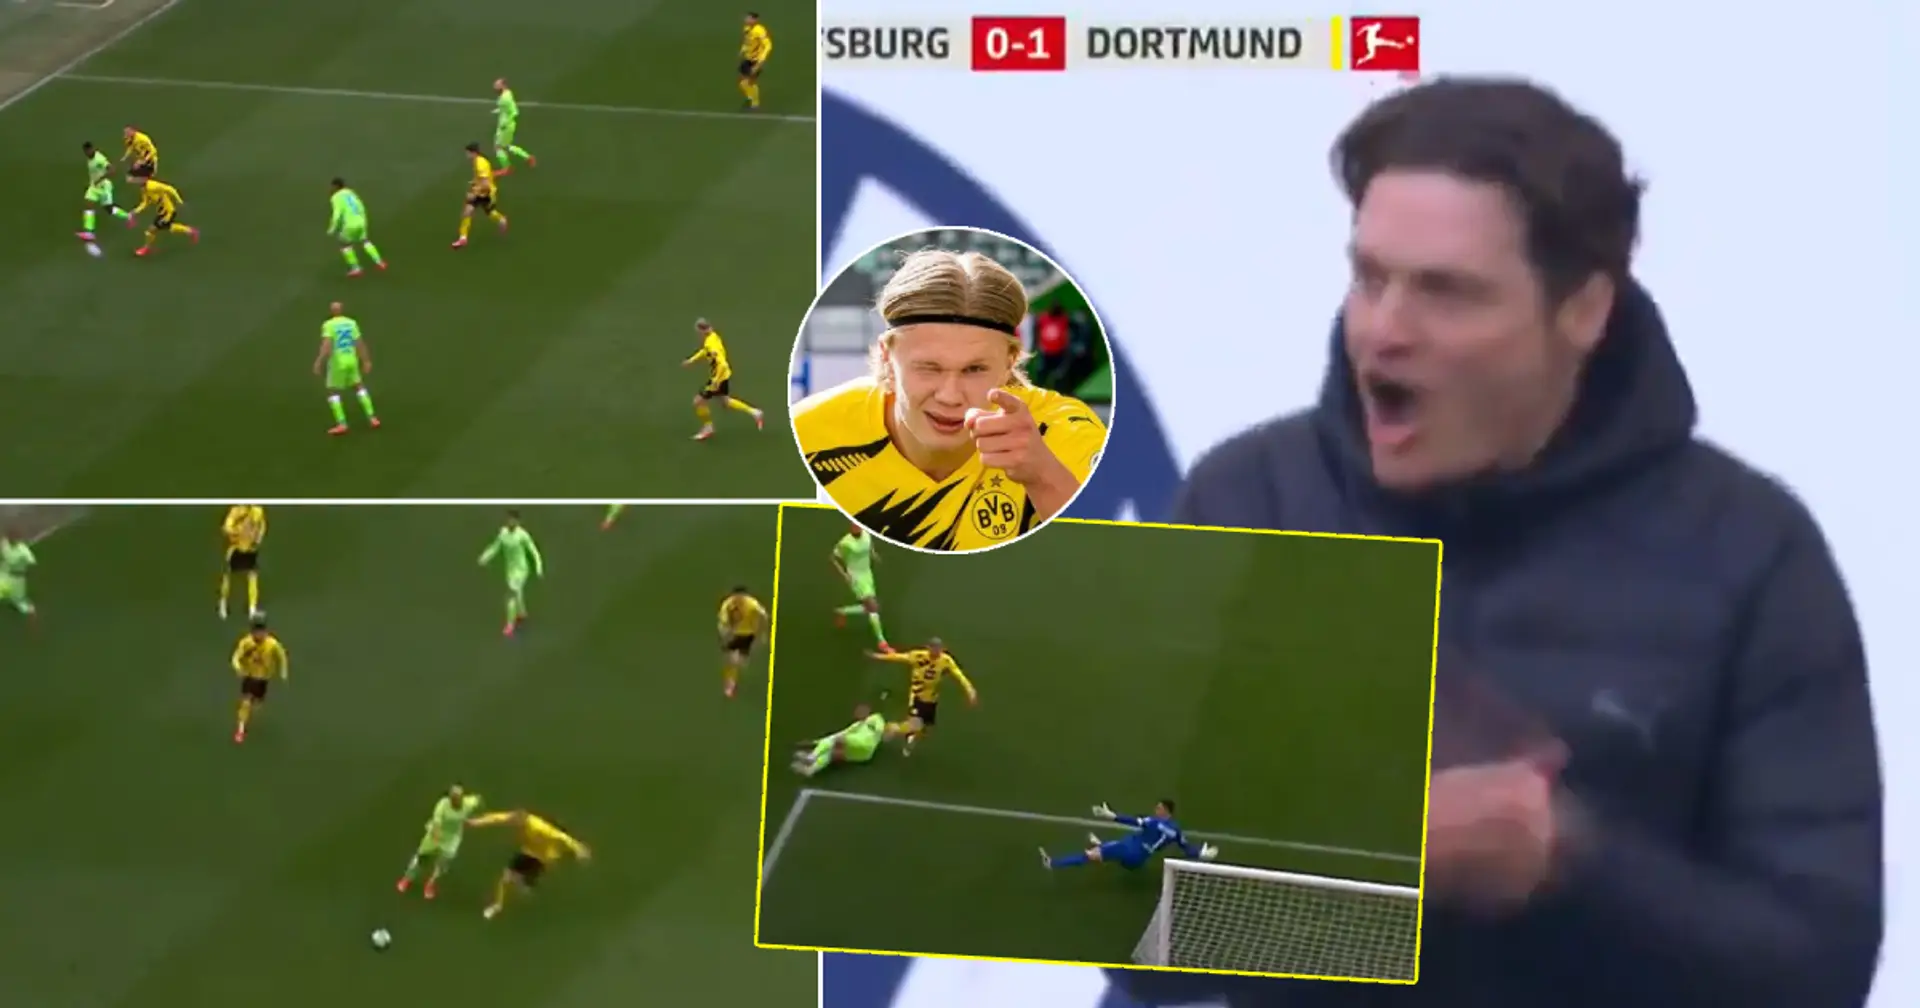 Erling Haaland shows mad speed to score crucial goal, carries Dortmund on his back again